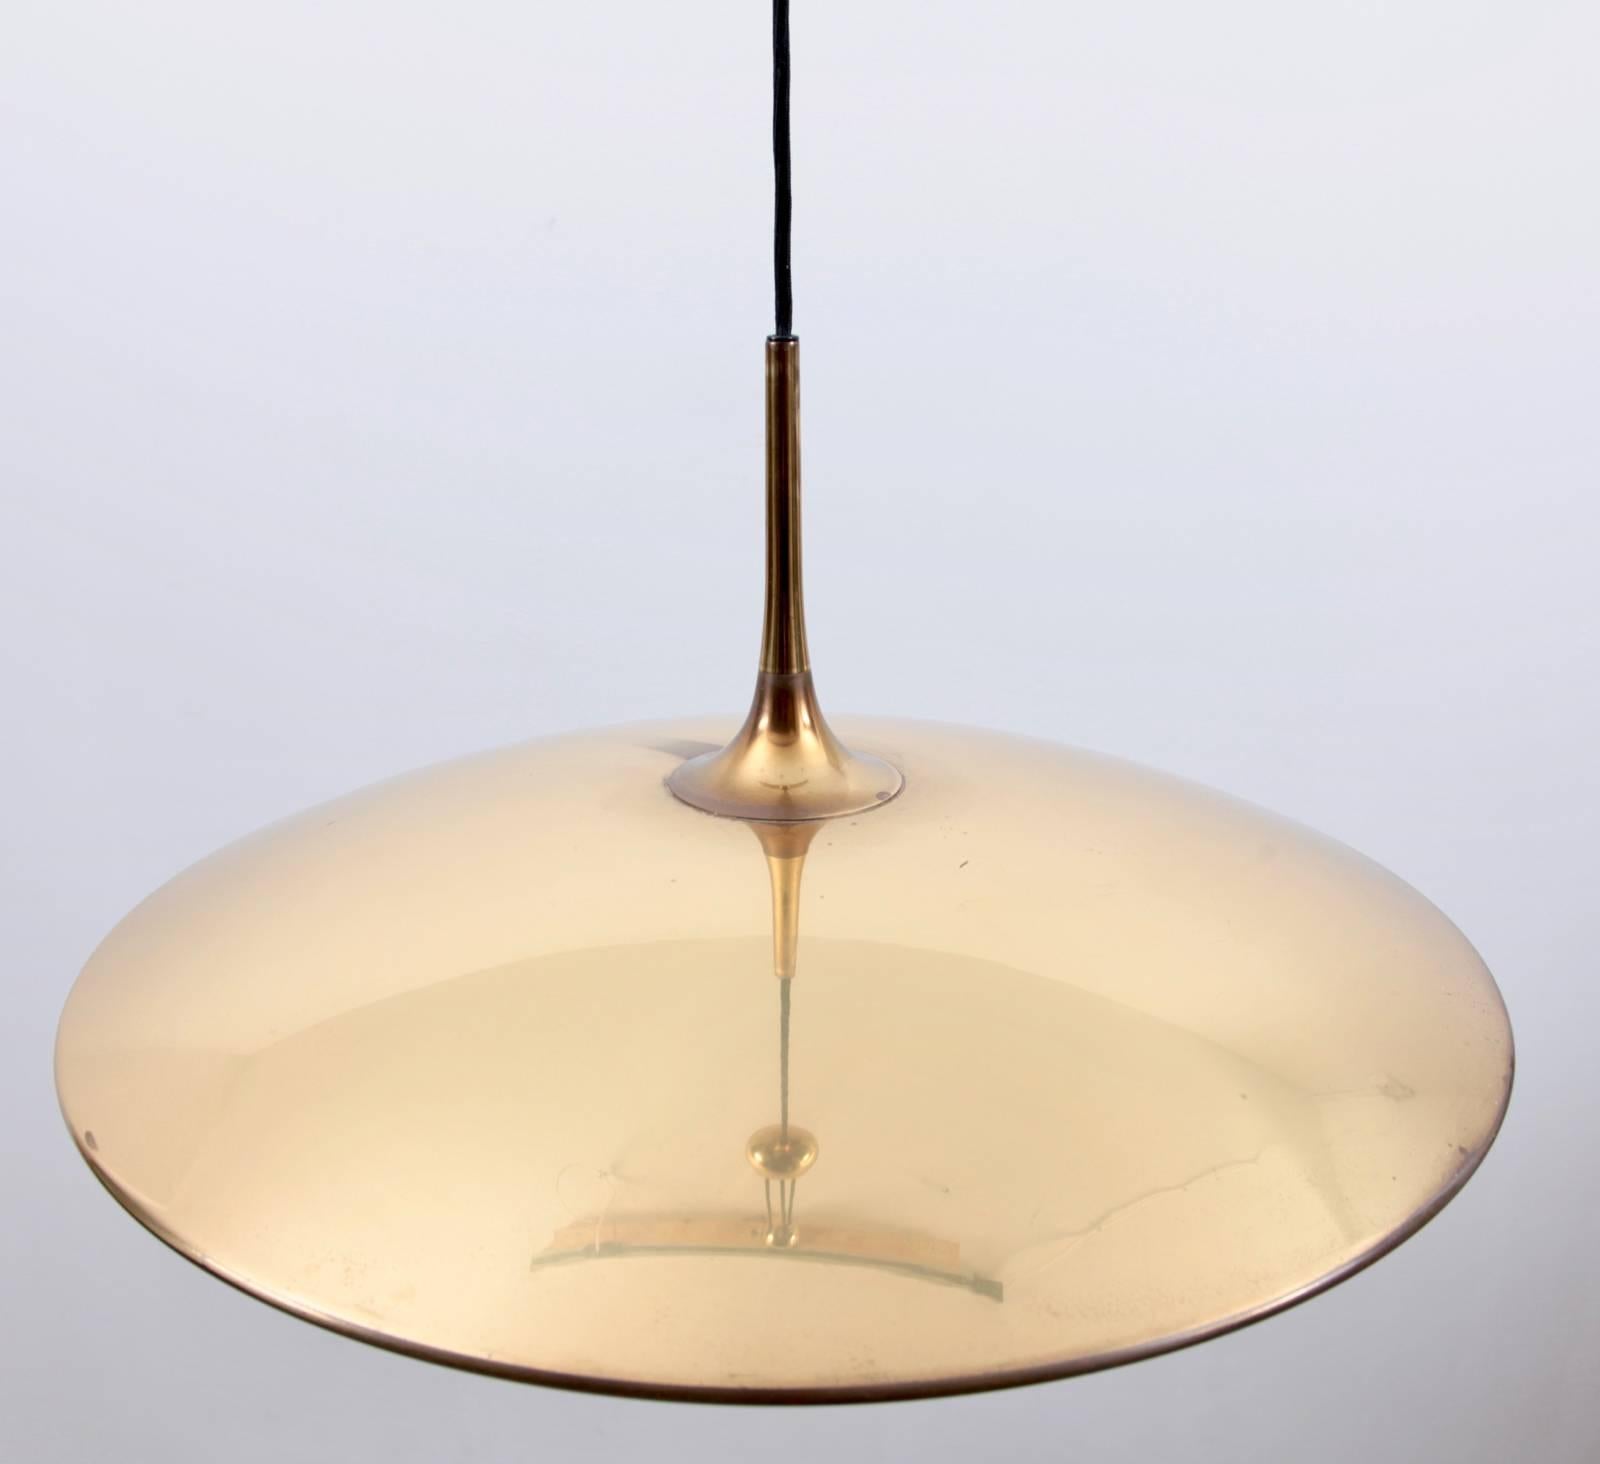 Mid-Century Modern Florian Schulz Onos 55 in Polished Brass with Centre Counterweight